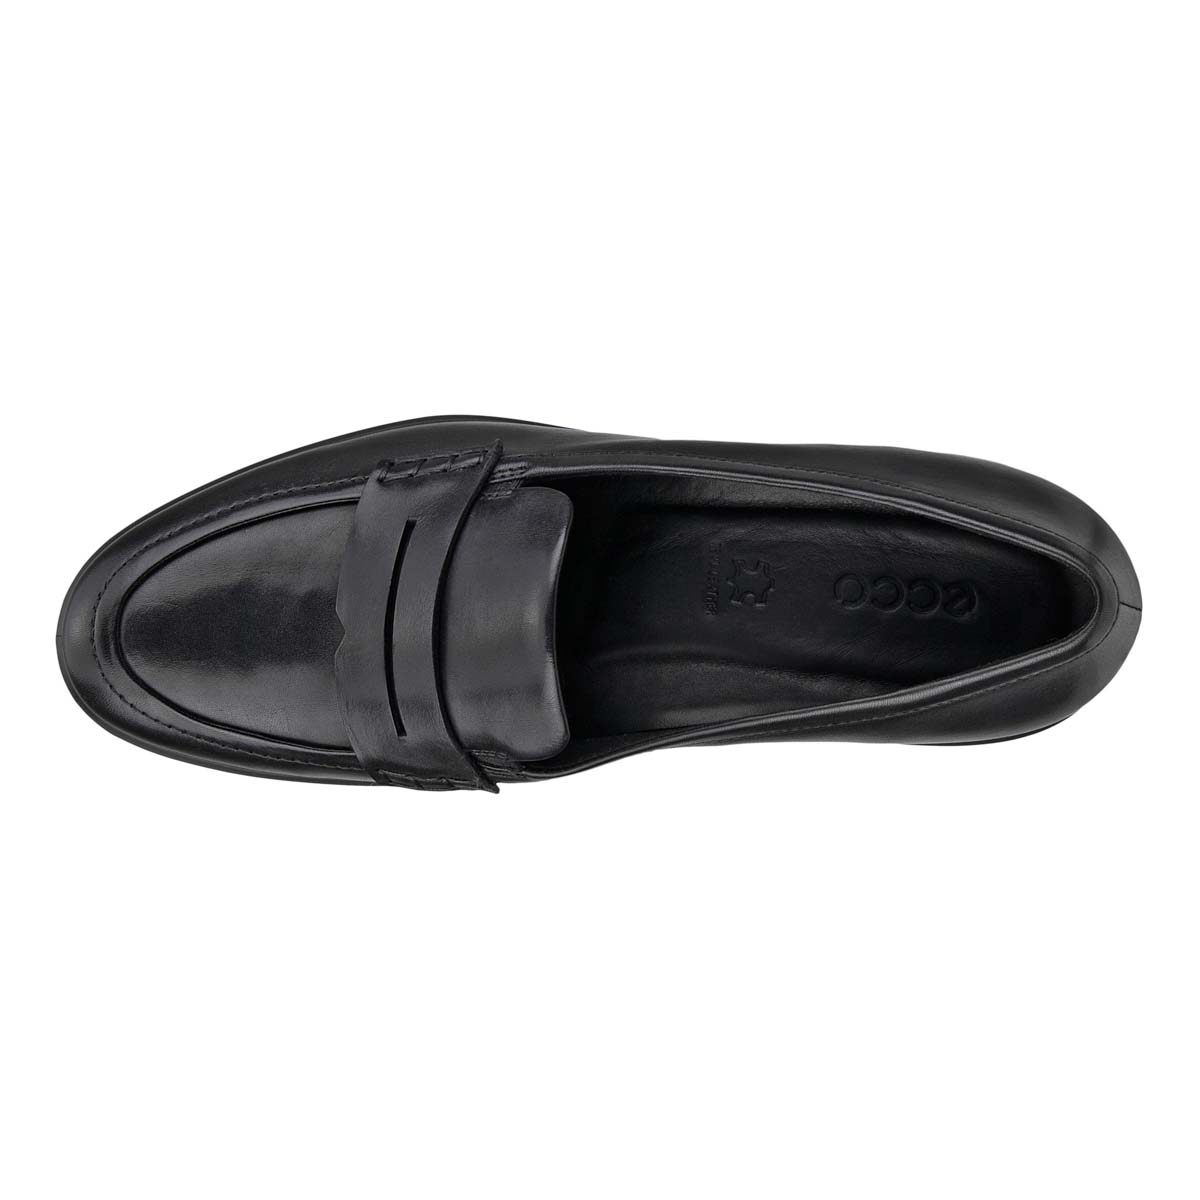 ECCO Felicia Loafer Black leather Womens Comfort Slip On Shoes 217323-01001